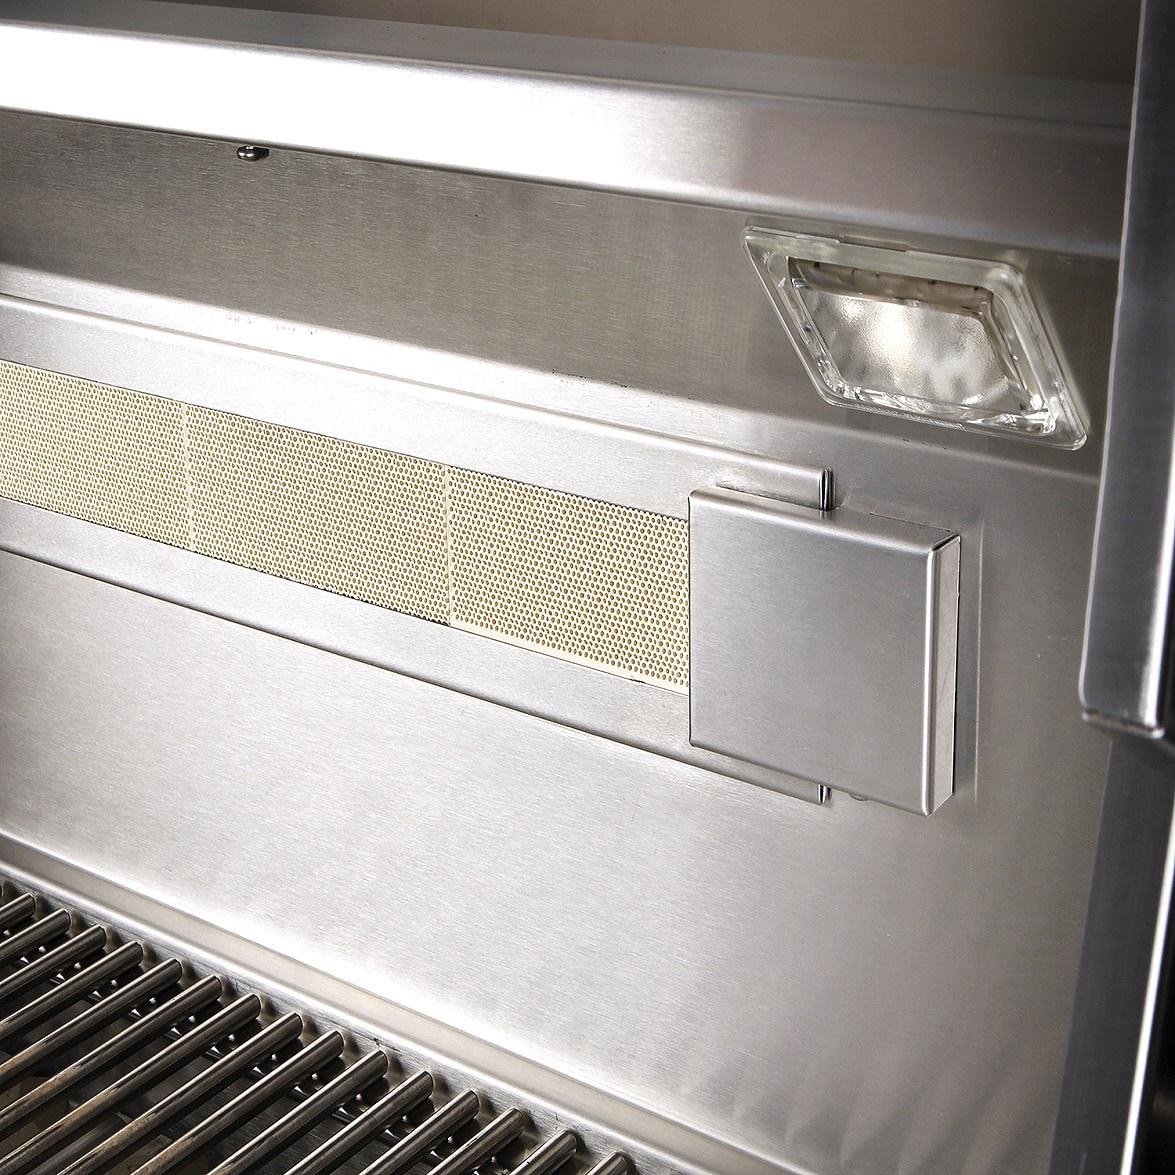 Artisan Professional 36-Inch 3-Burner Built-In Natural Gas Grill With Rotisserie - ARTP-36-NG - image 5 of 6